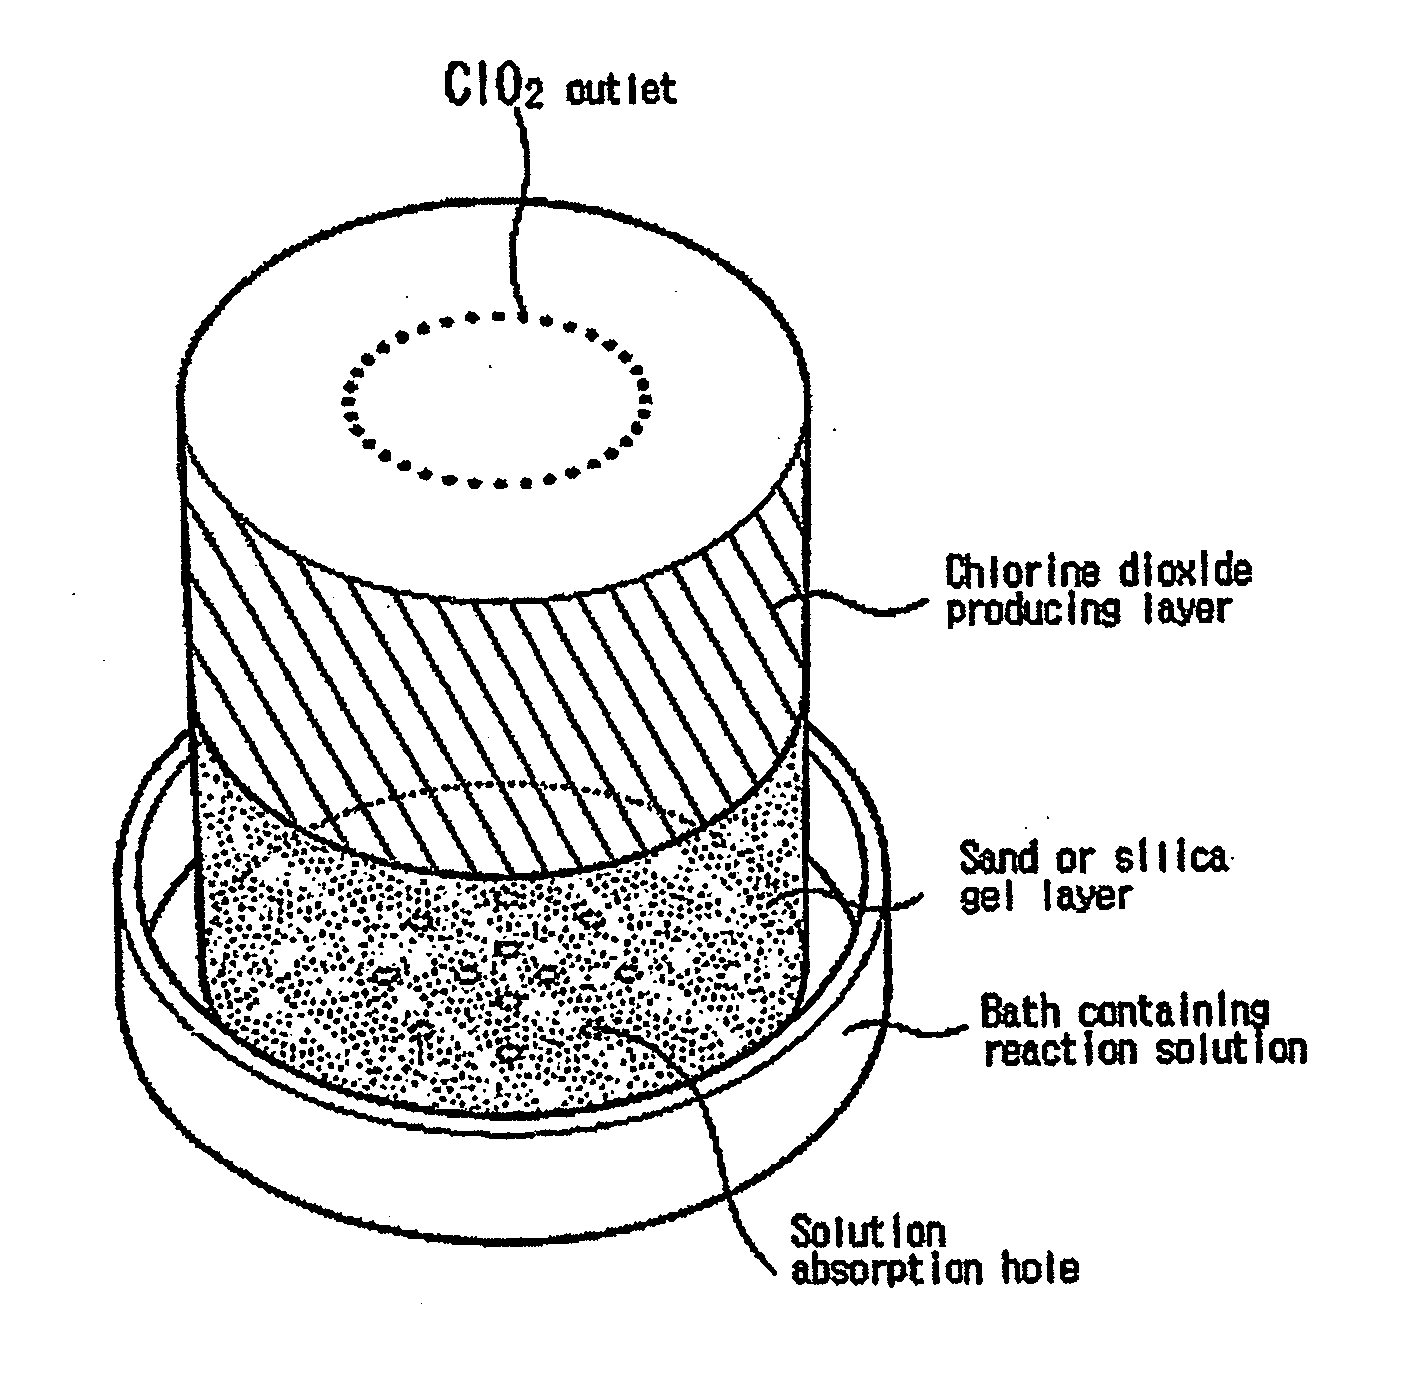 Simple apparatus for producing chlorine dioxide gas